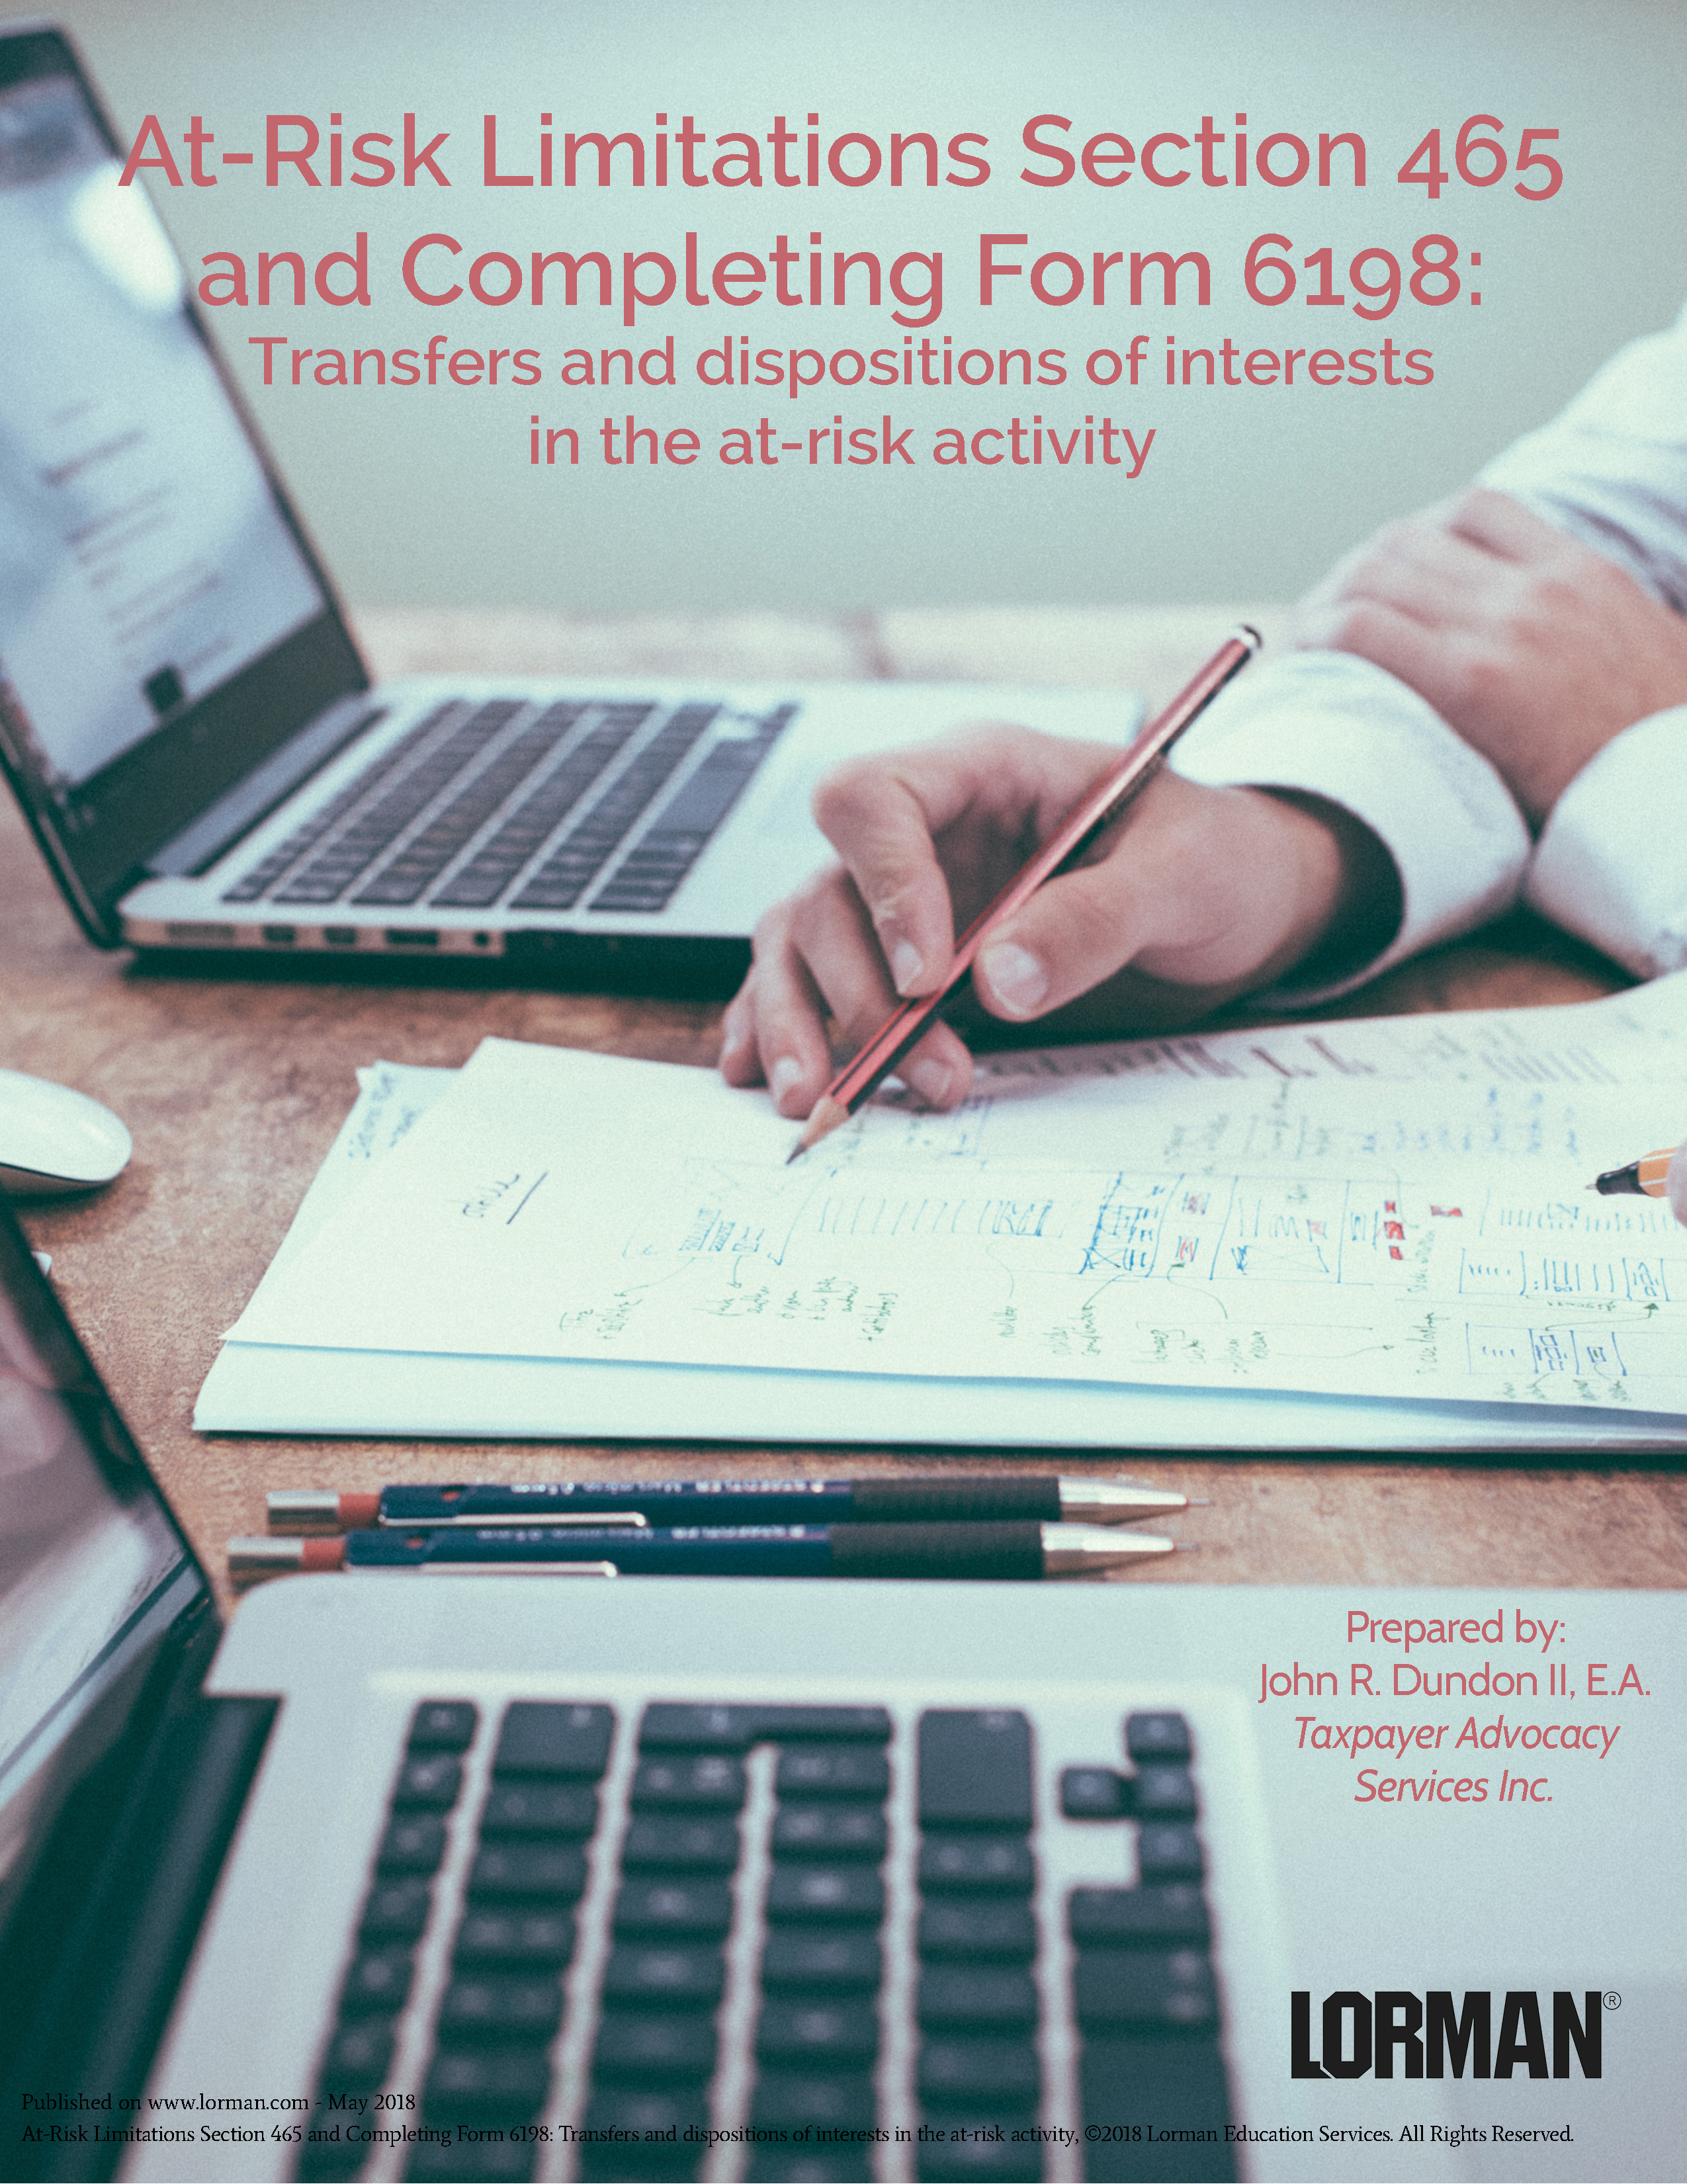 At-Risk Limitations Section 465 and Completing Form 6198